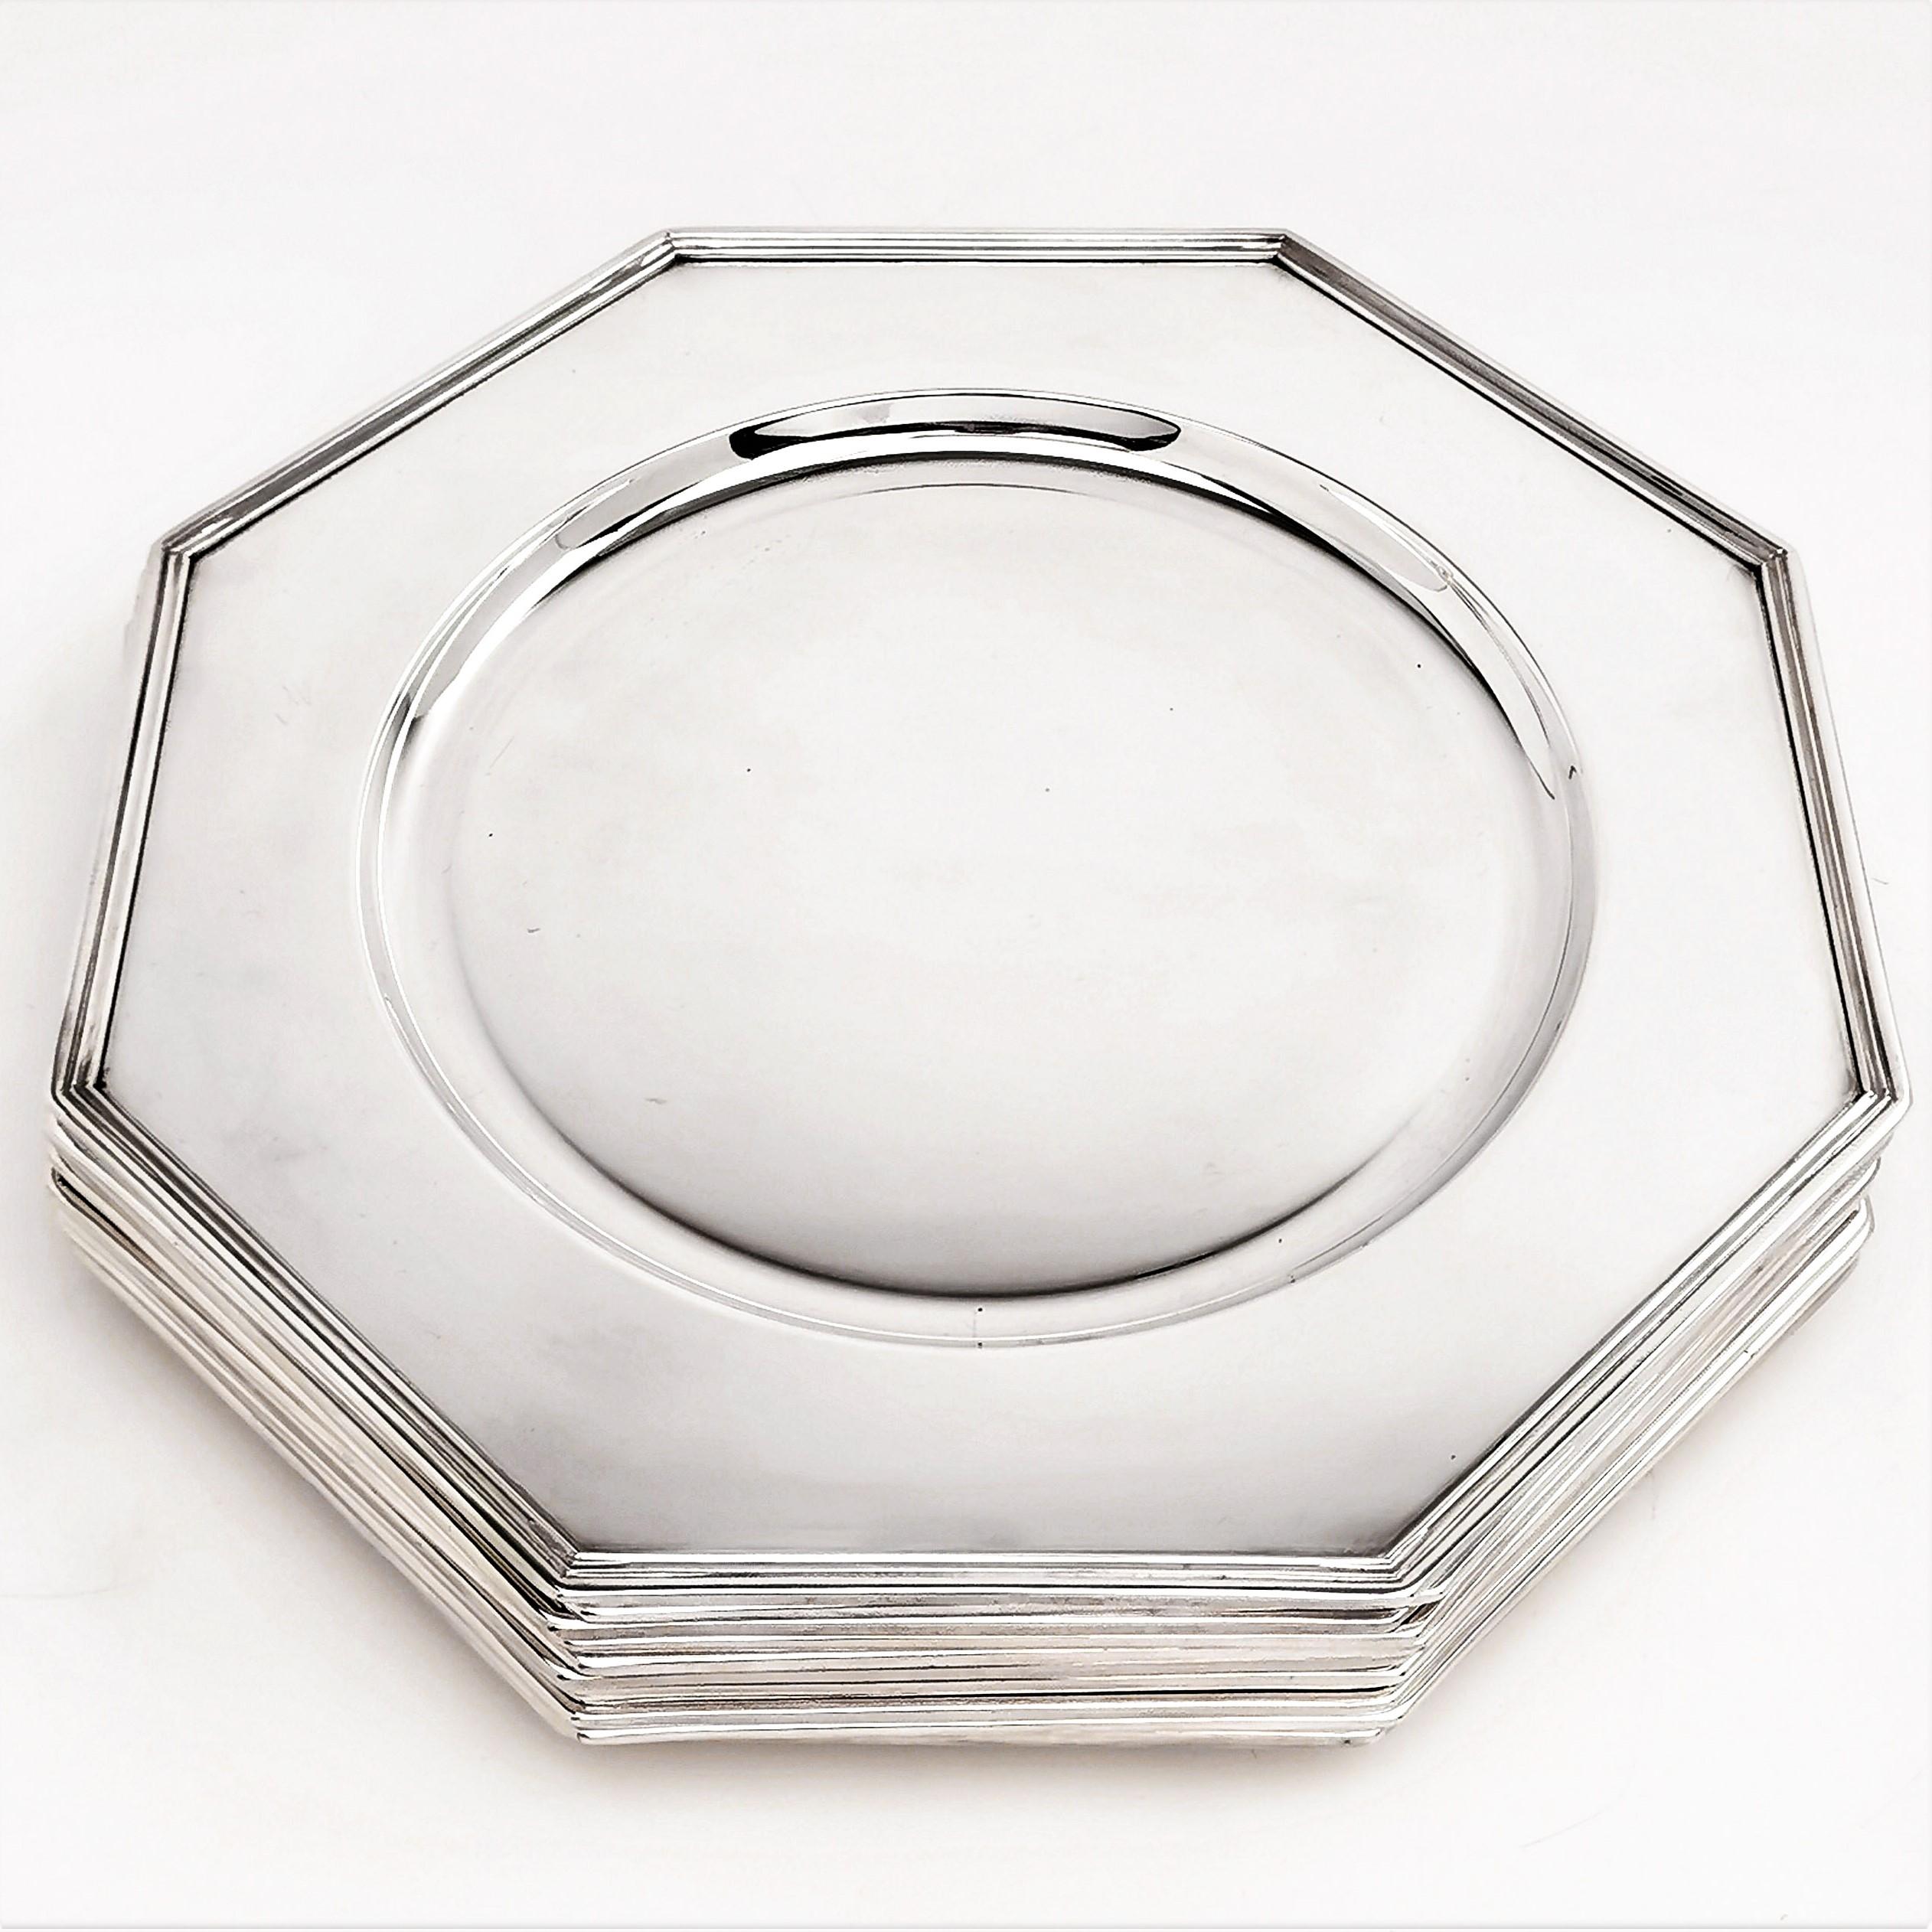 A beautiful set of 12 Solid Silver Octagonal Under Plates or Chargers. These gorgeous under plates have clean, modern lines to create an elegant look.

These chargers are created from 930 standard silver, a higher grade than is usual.

Made in Italy